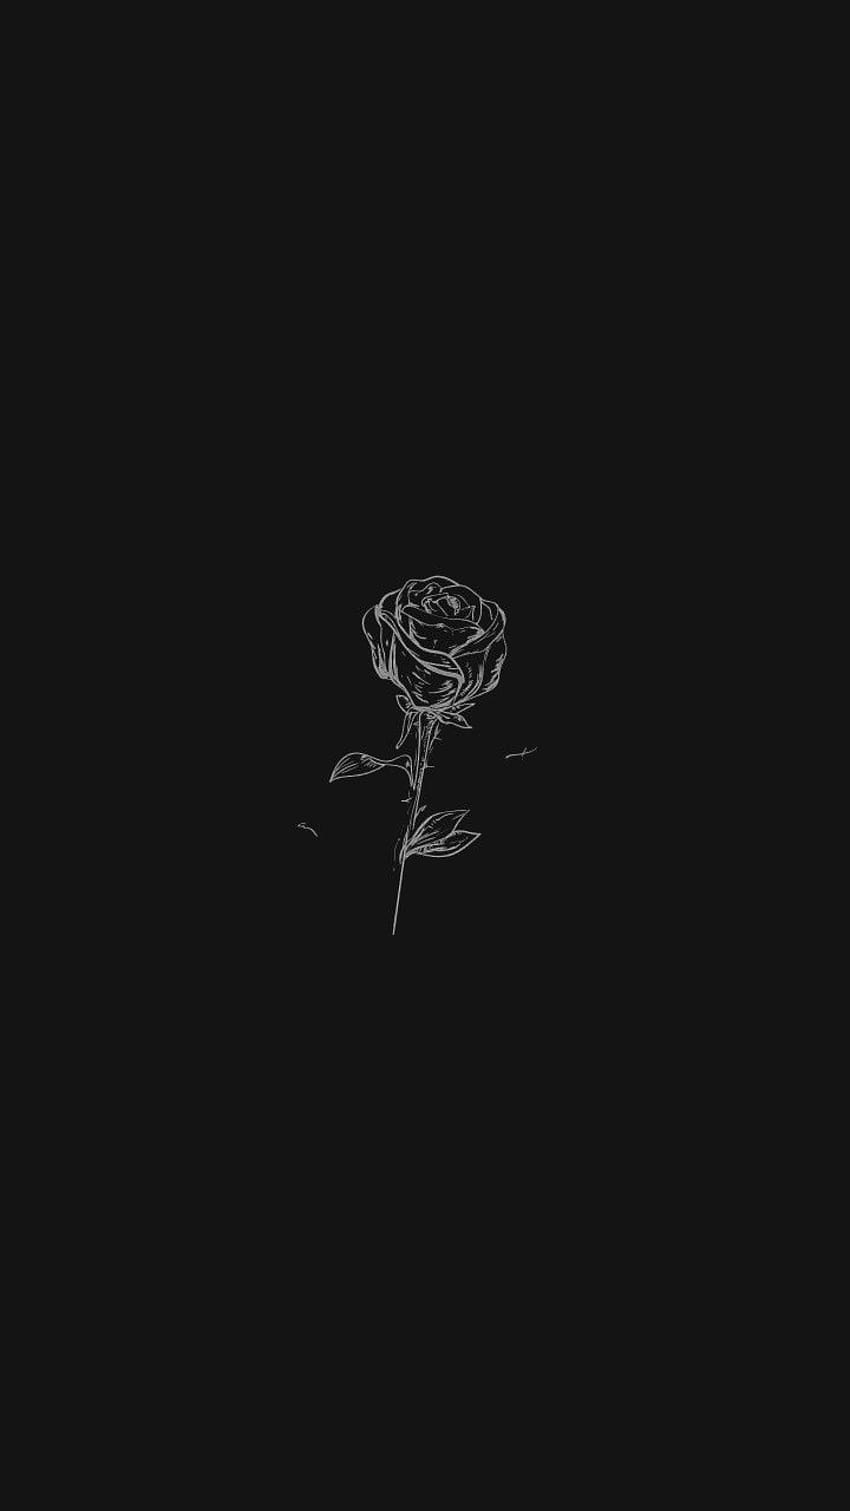 Black And White Aesthetic Roses posted by Michelle Sellers, black aesthetic roses HD phone wallpaper